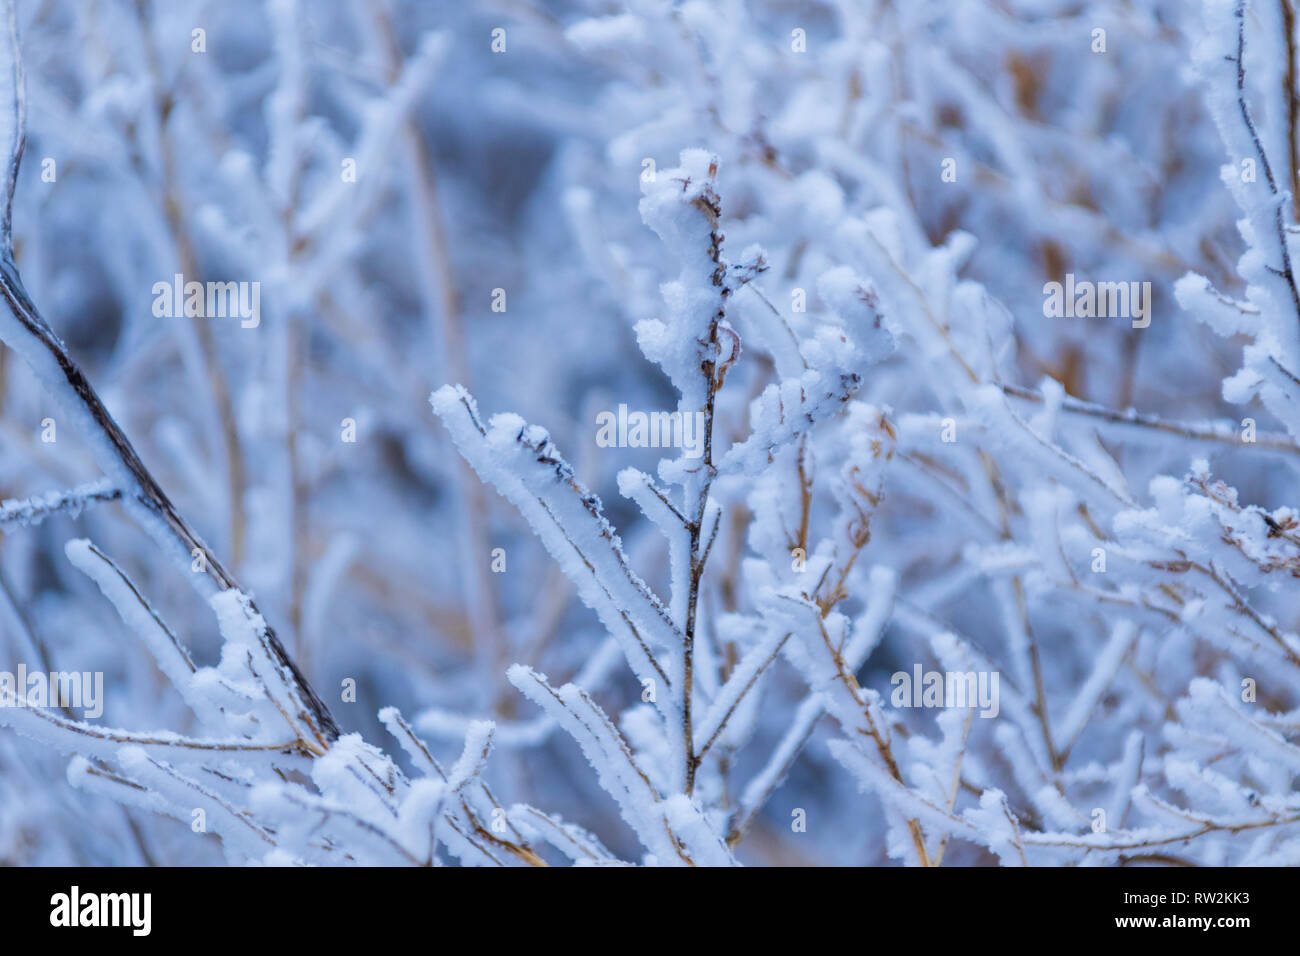 on a bitter cold day in Kansas, the vegetation is covered in a thick frost. Scott City, Kansas 2019 Stock Photo